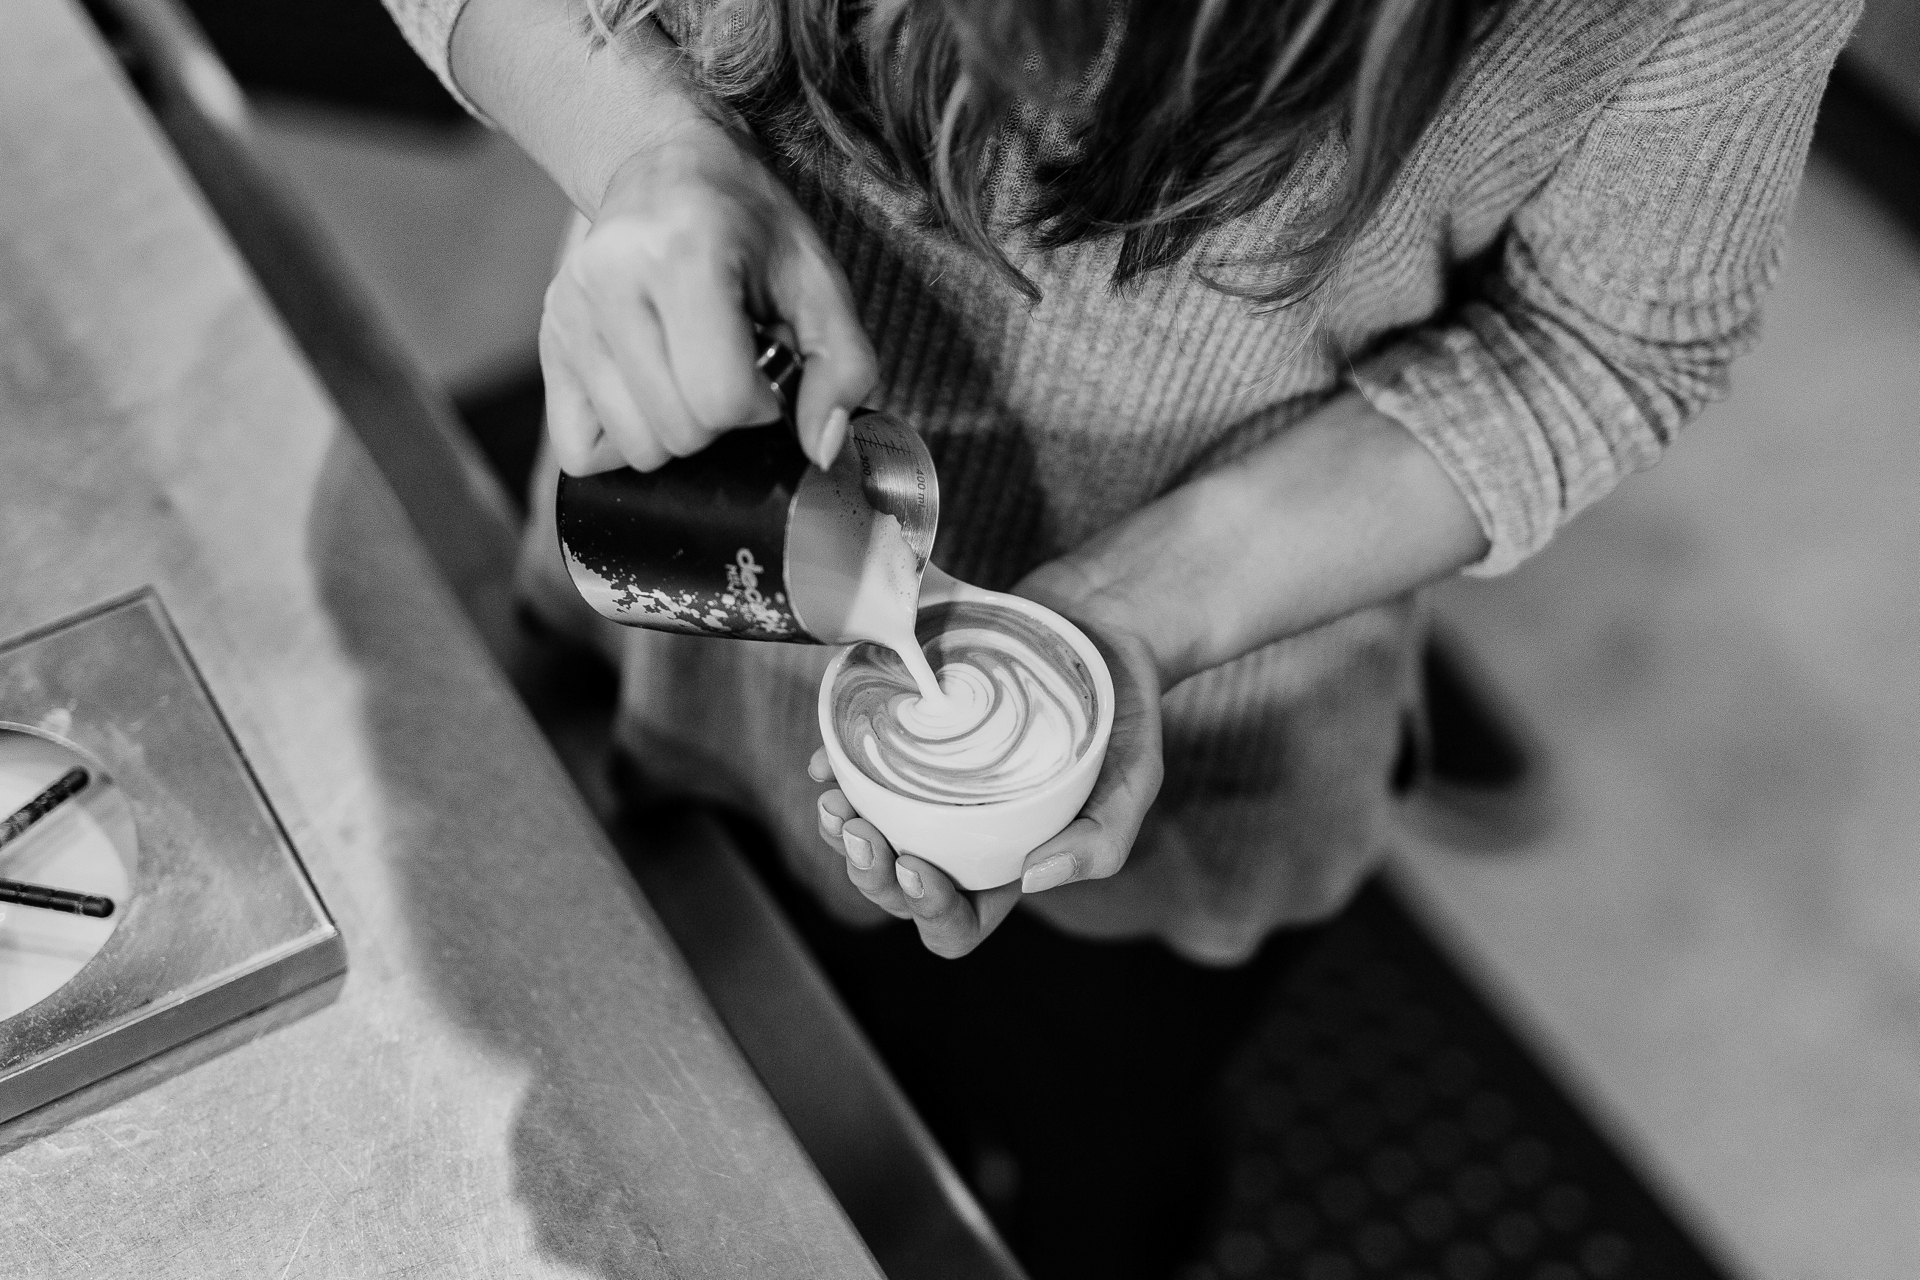 A barista pouring a latte, seen from above